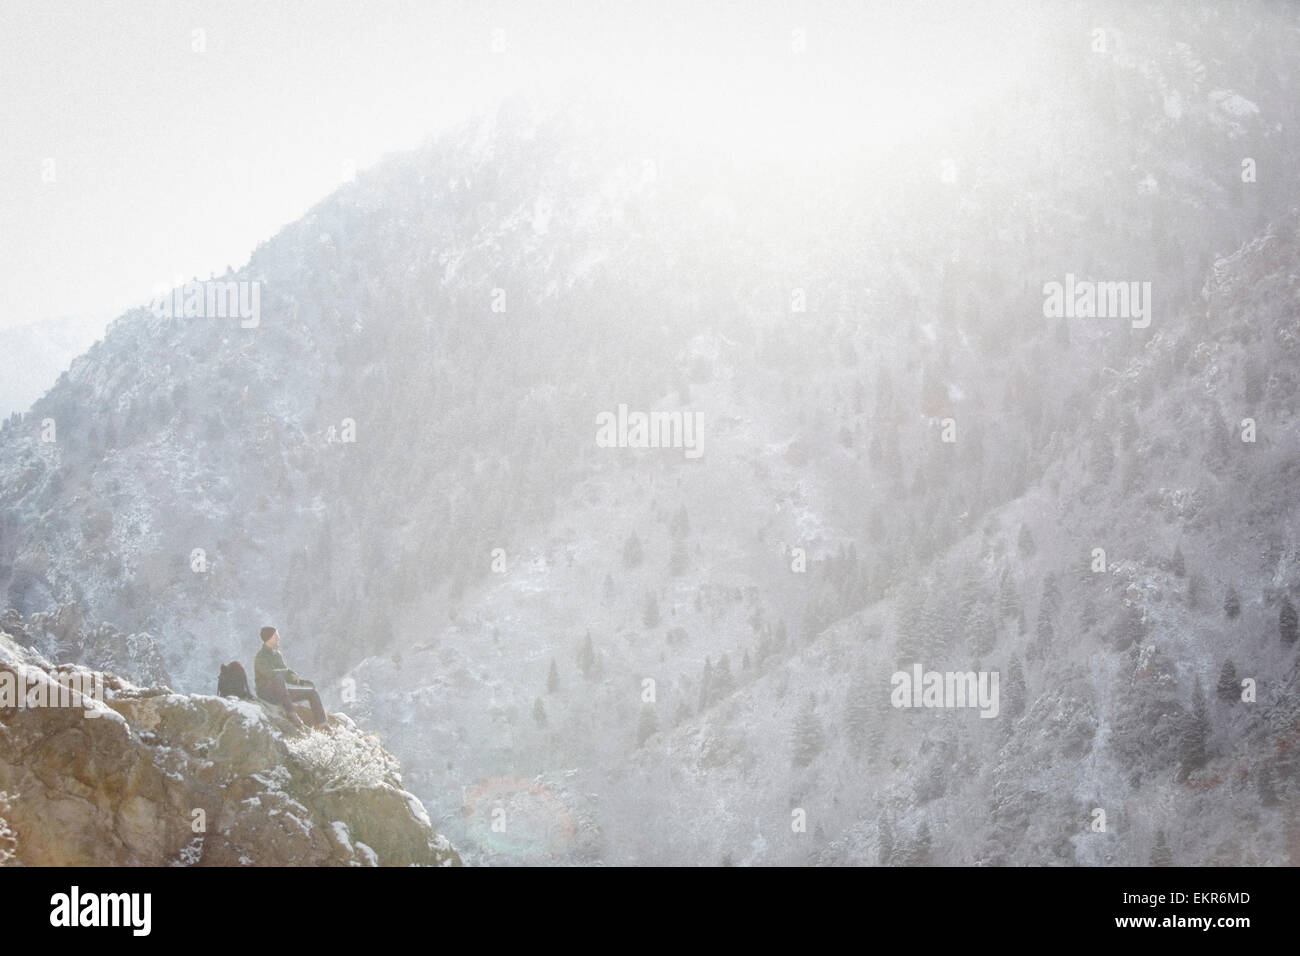 A man, a hiker in the mountains, taking a rest on a rock outcrop above a valley. Stock Photo